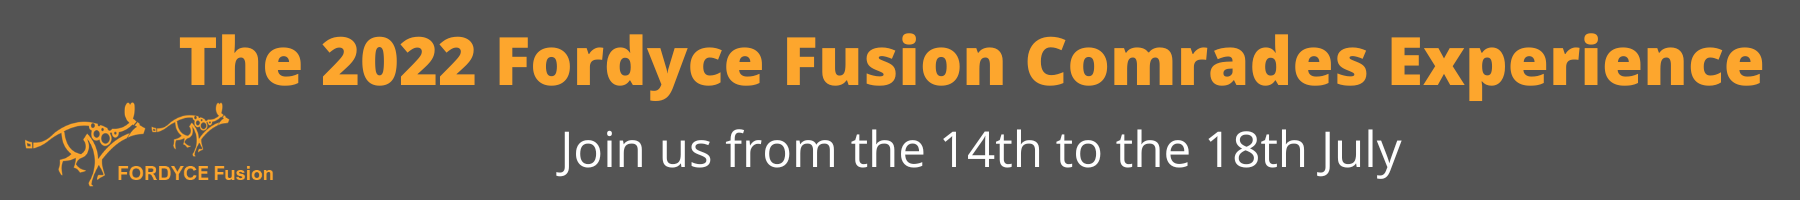 Fordyce Fusion - Banner 2